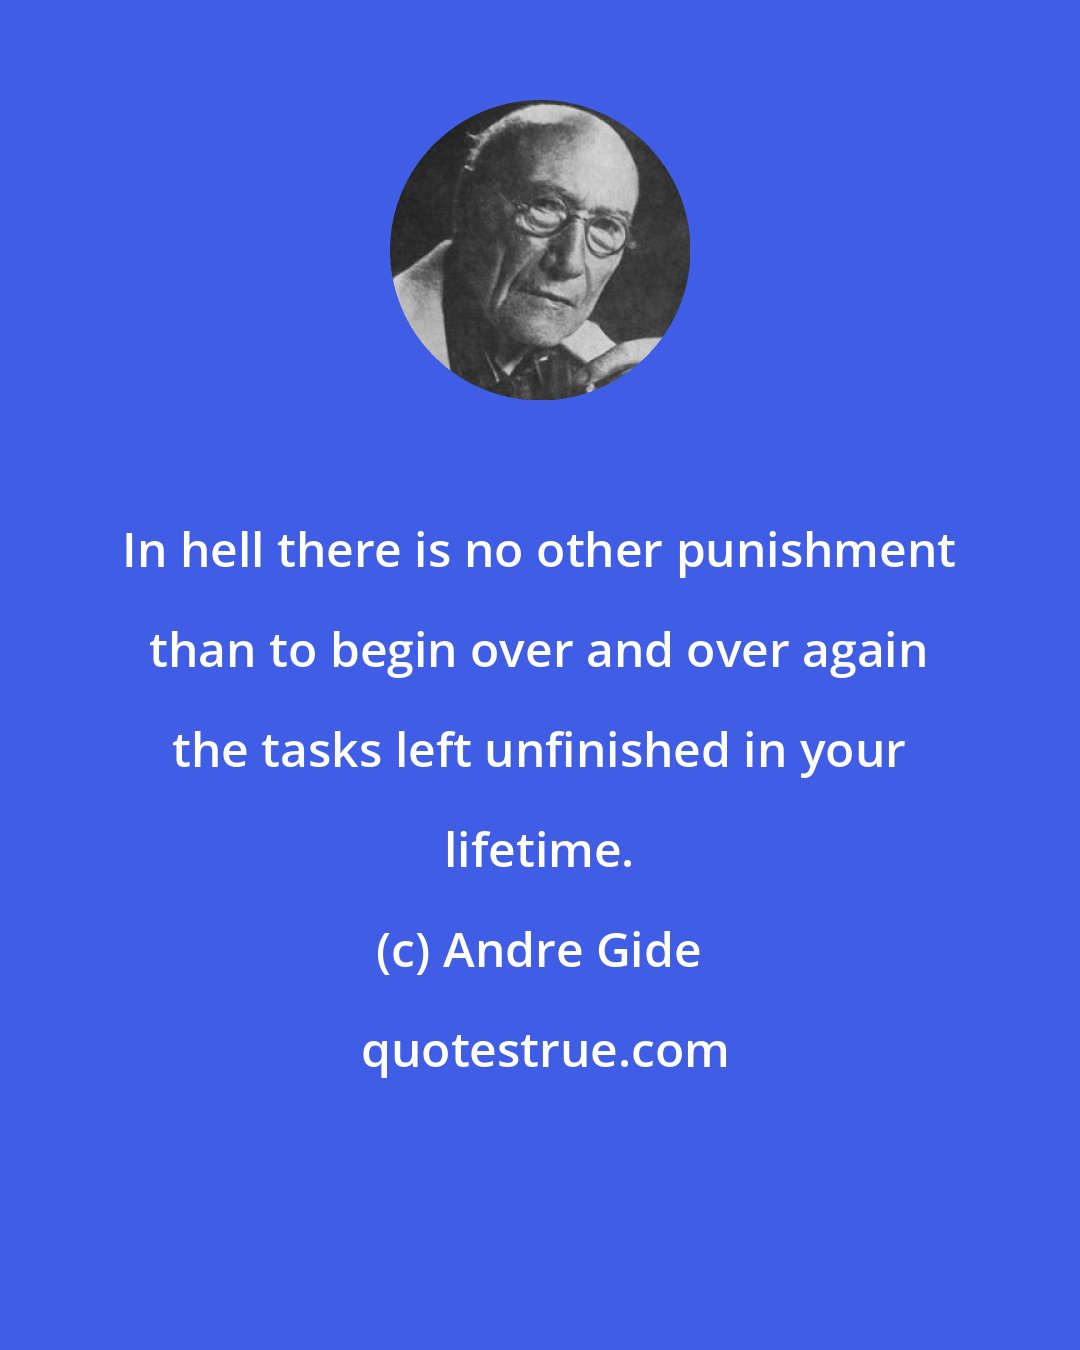 Andre Gide: In hell there is no other punishment than to begin over and over again the tasks left unfinished in your lifetime.